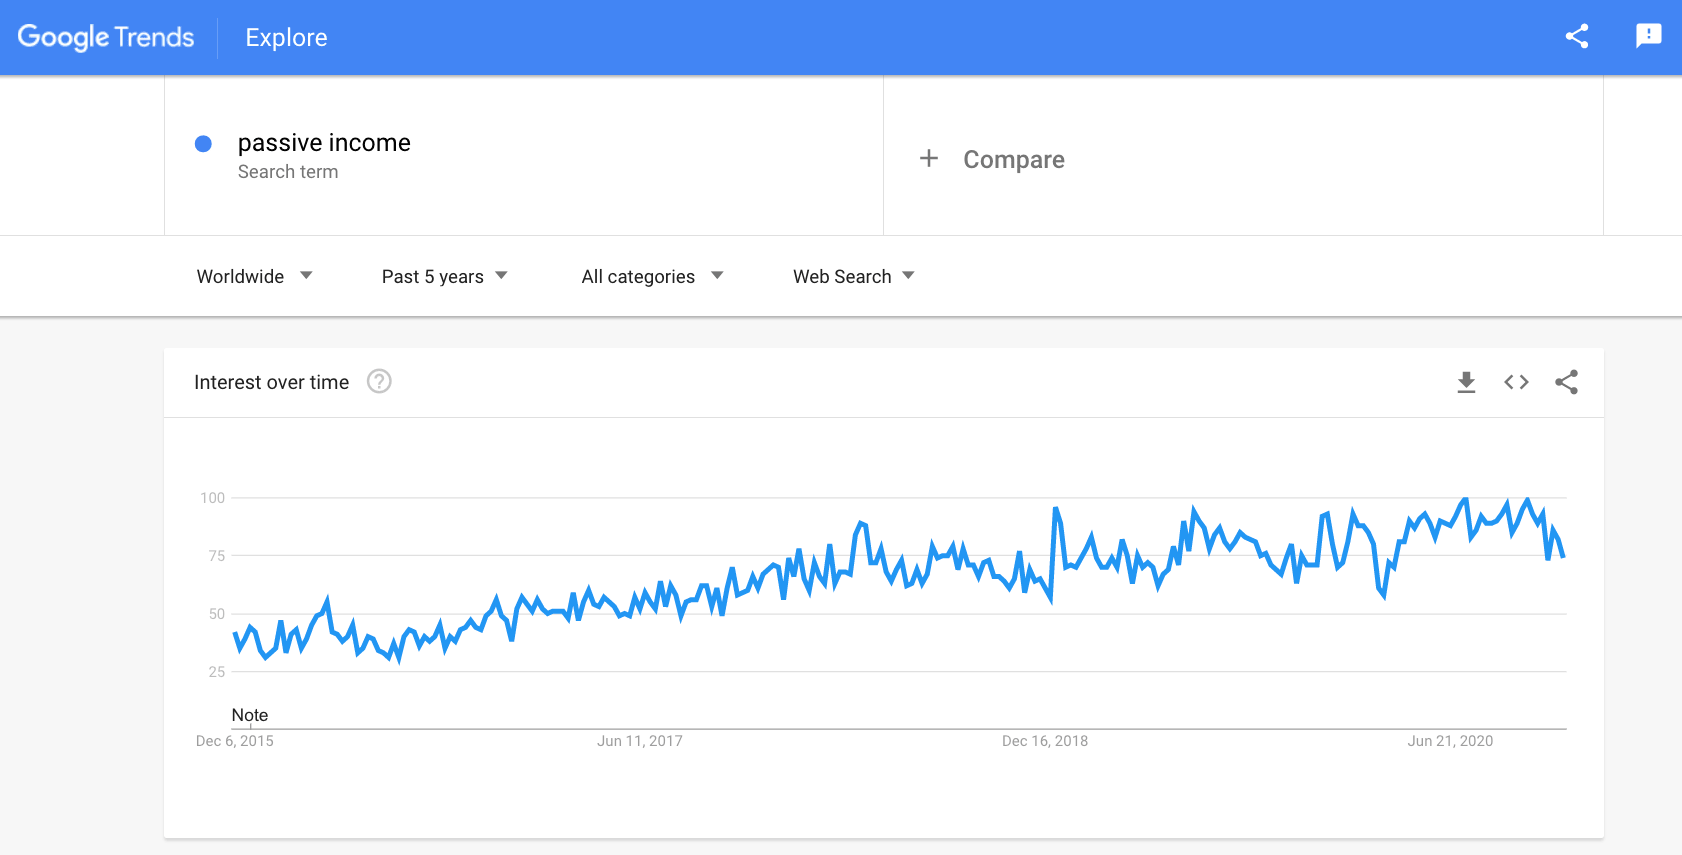 a picture showing how often people search for passive income streams